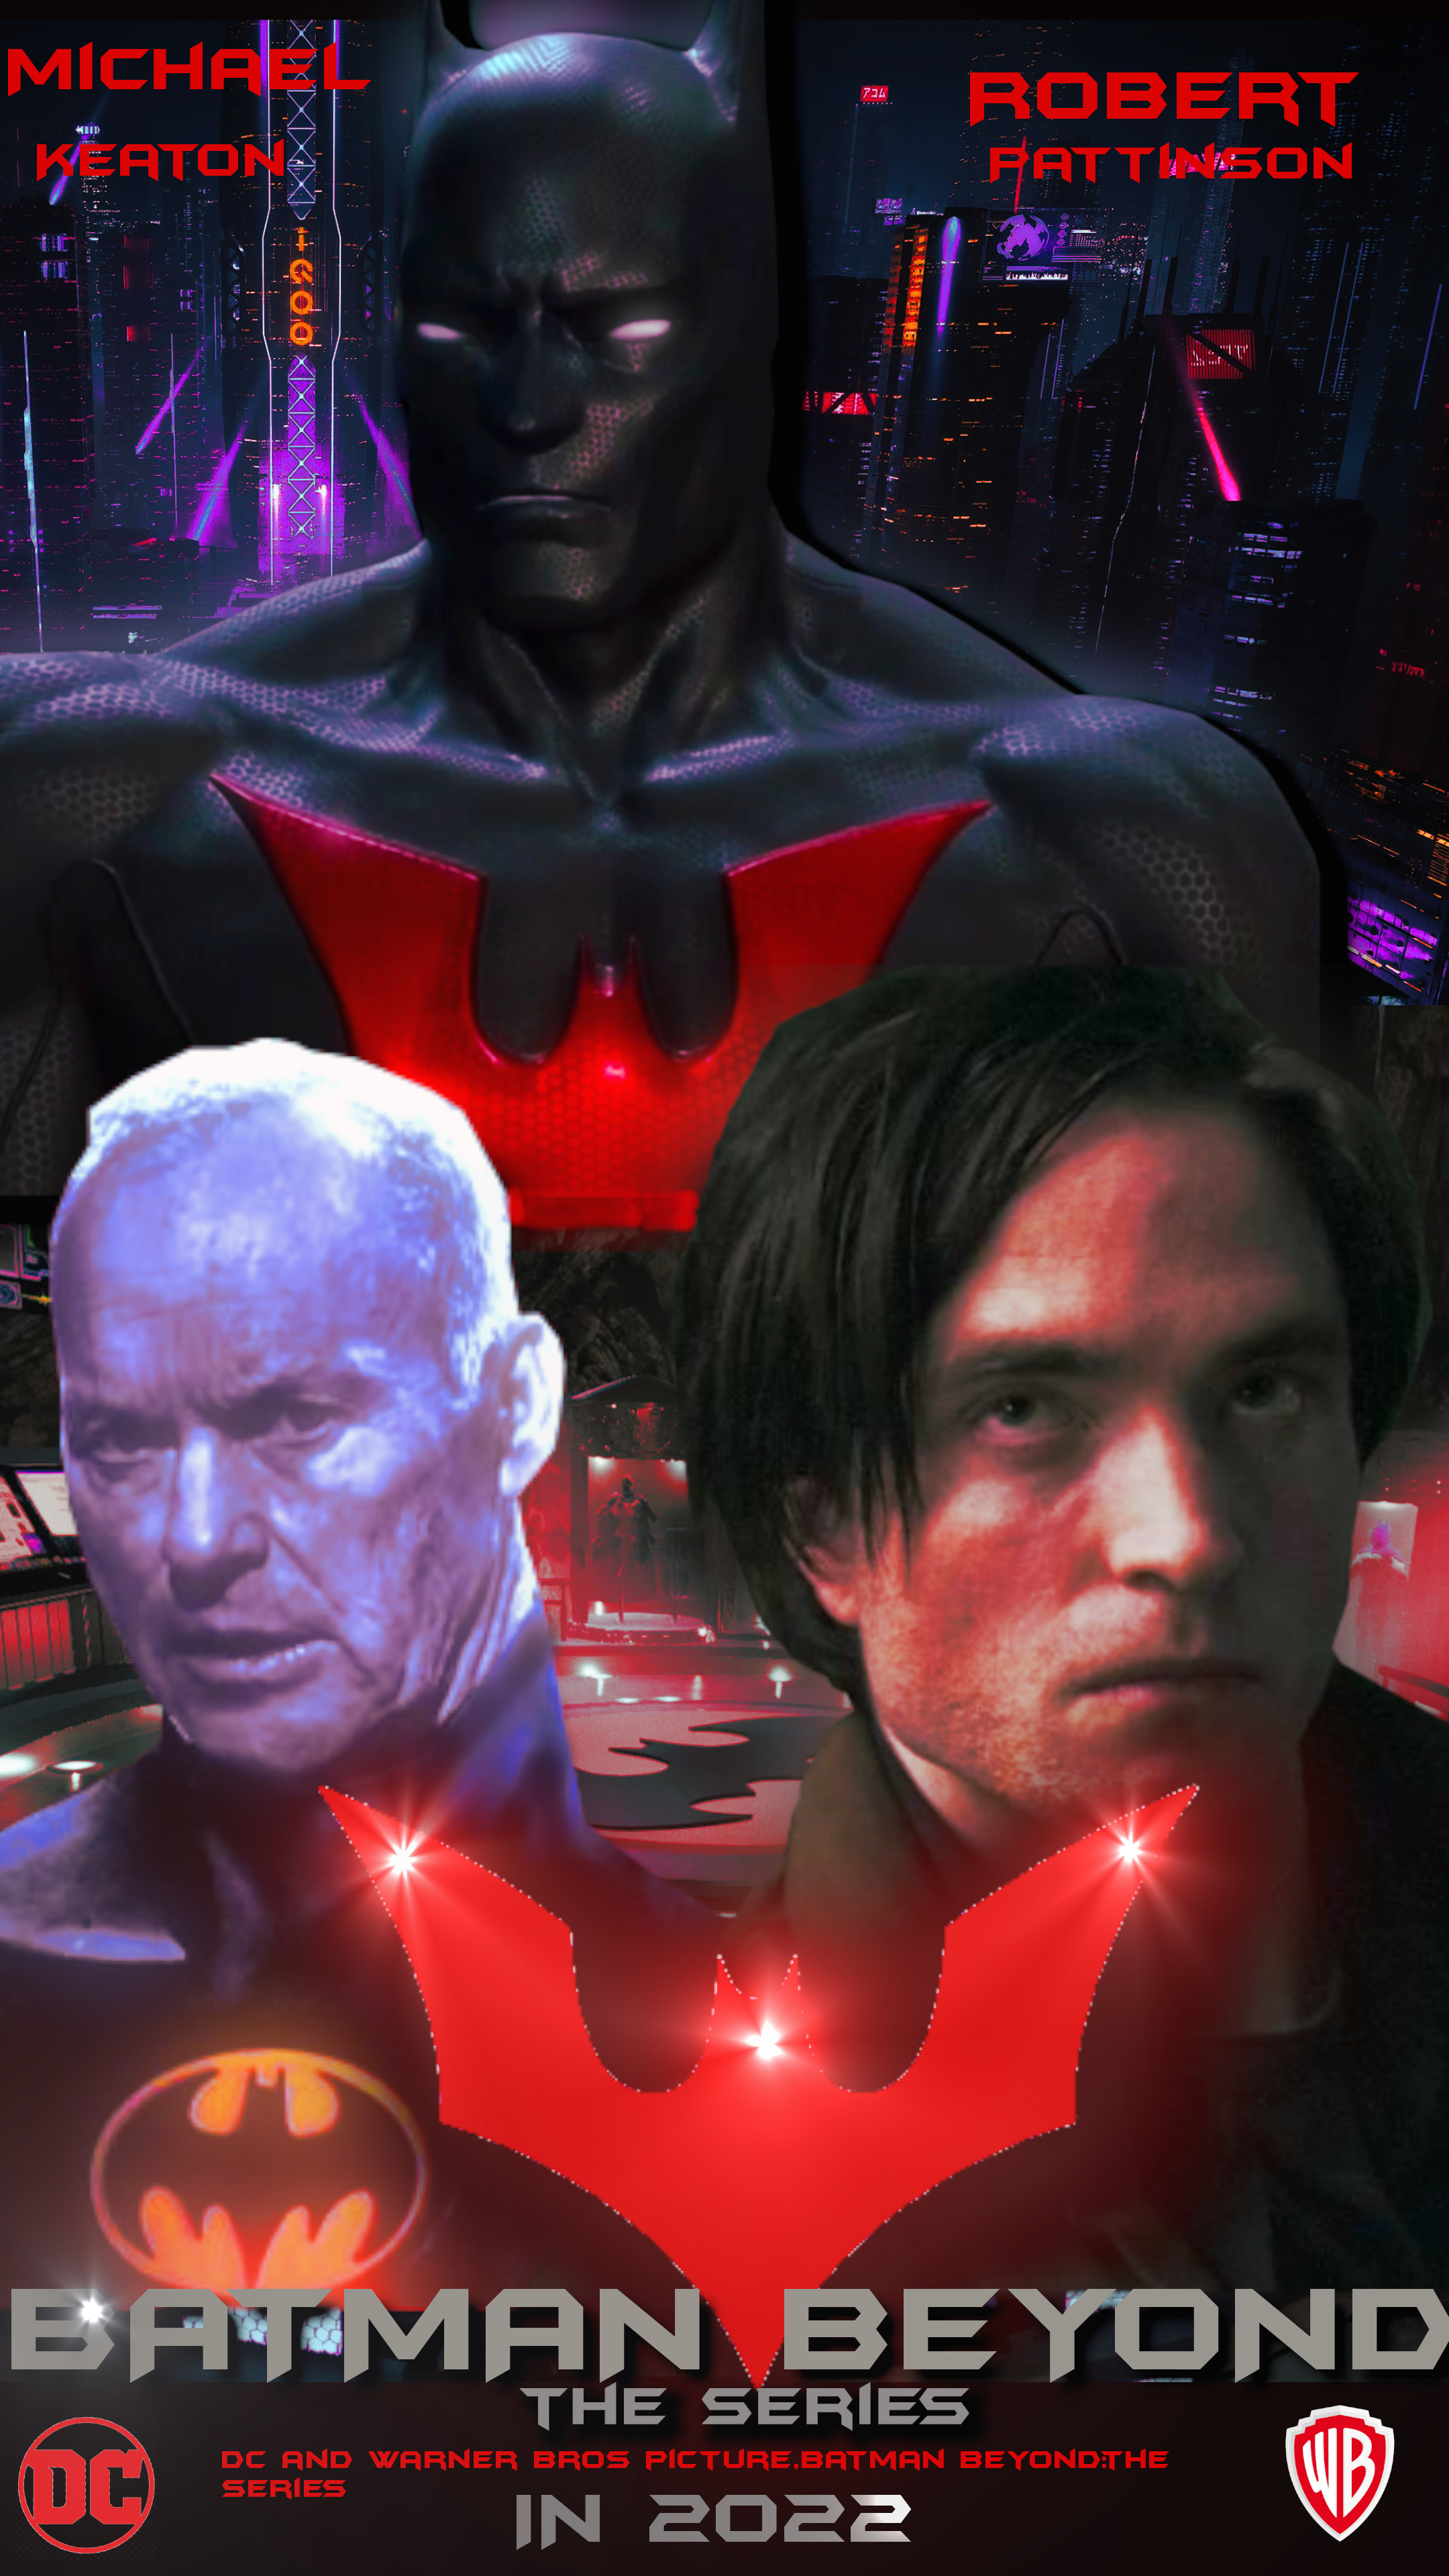 Batman Beyond:The series(Live action) by STRIKER-Productions on DeviantArt